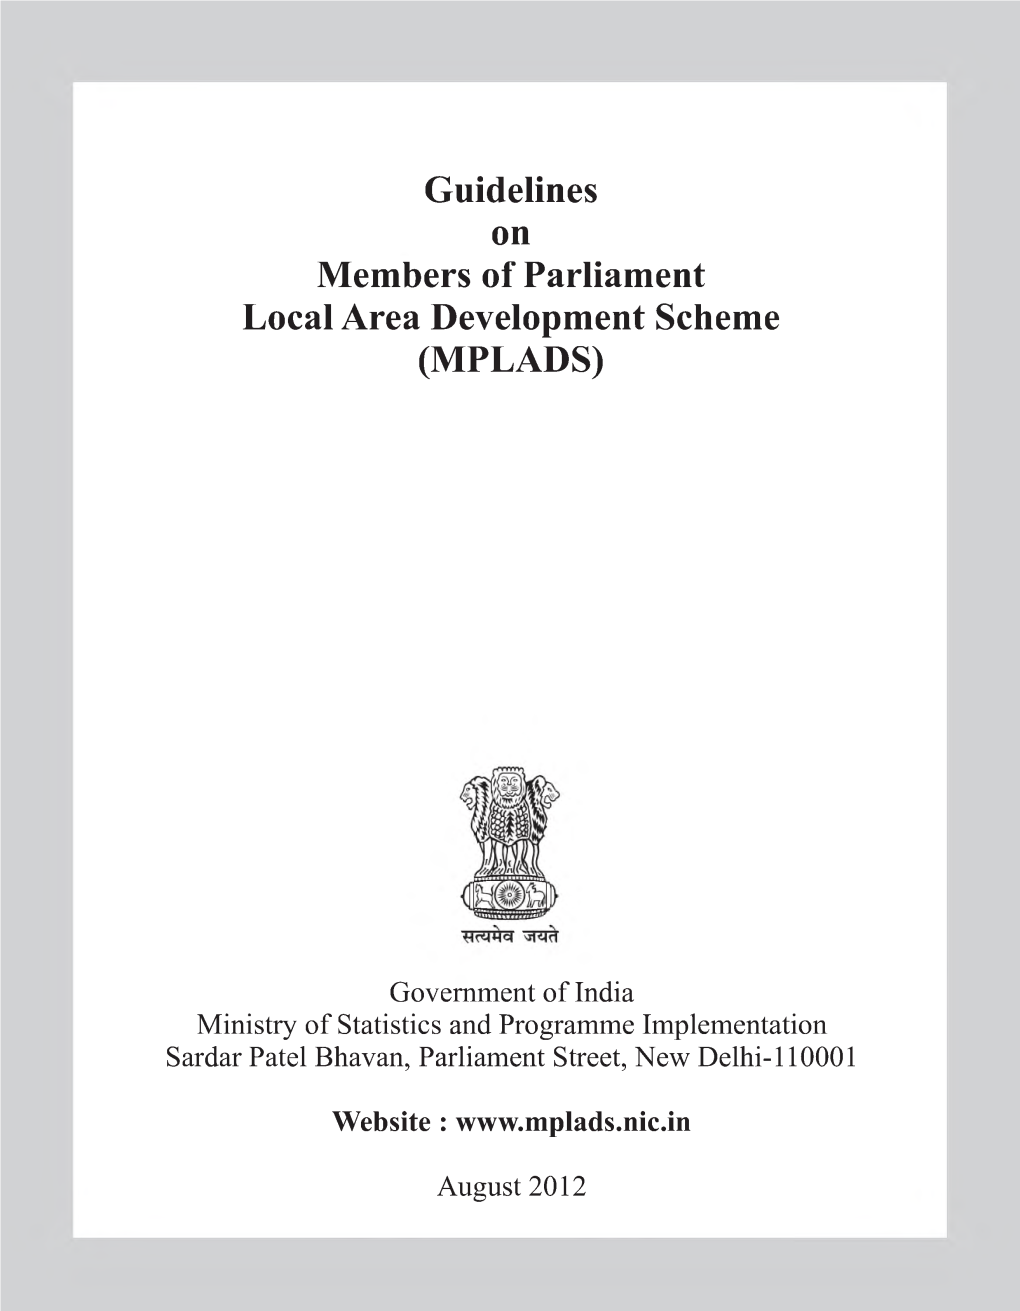 Guidelines on Members of Parliament Local Area Development Scheme (MPLADS)